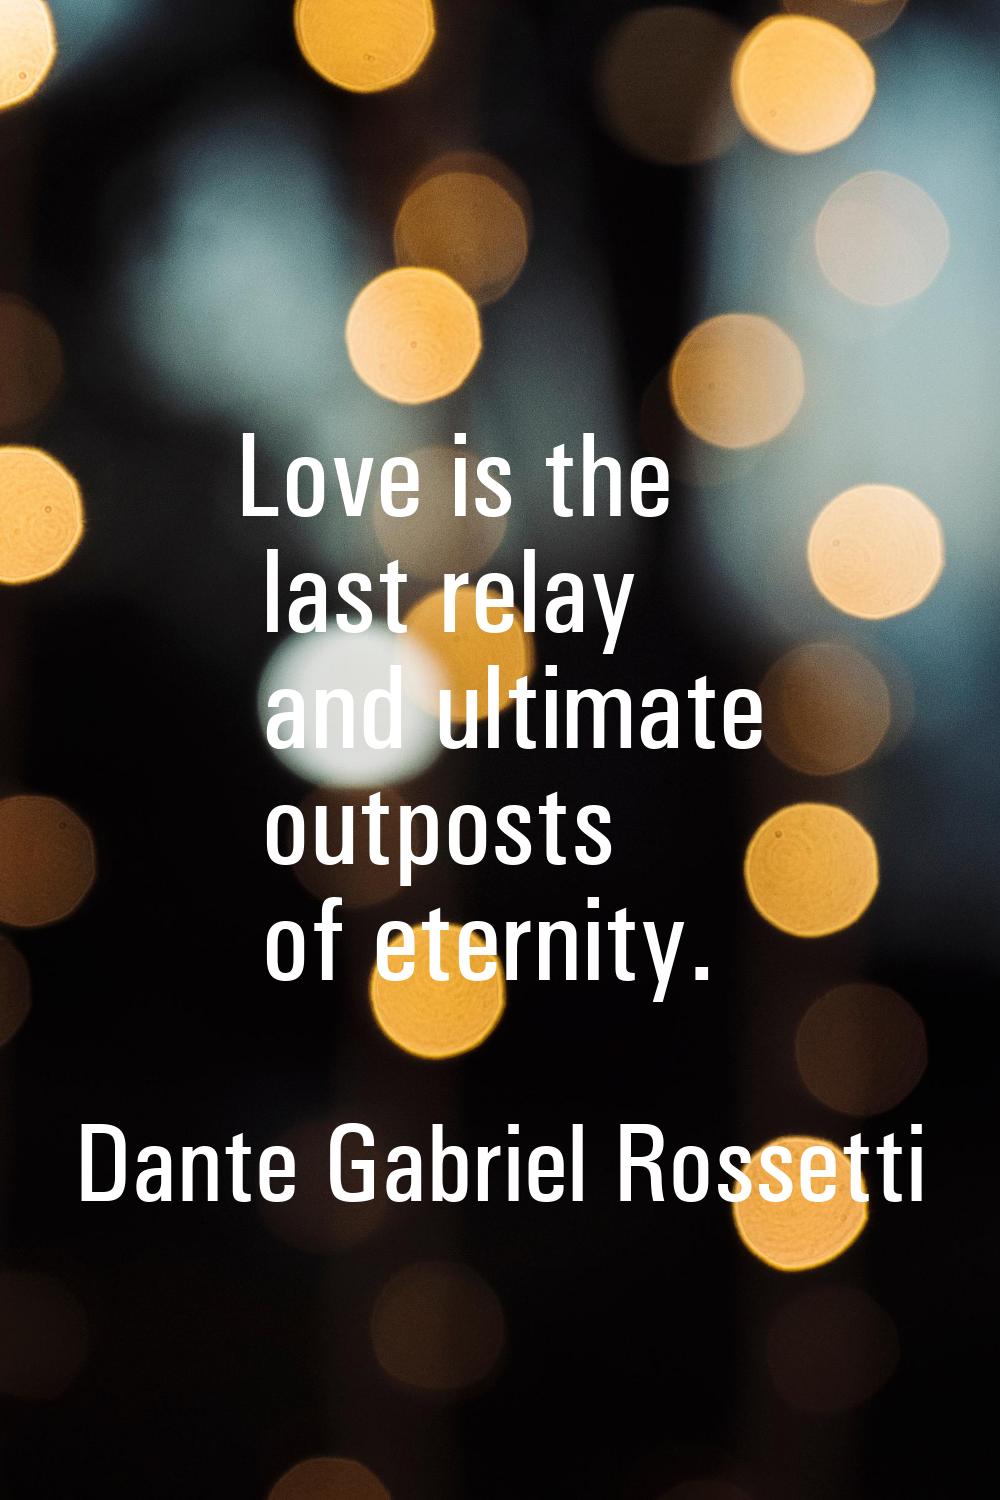 Love is the last relay and ultimate outposts of eternity.